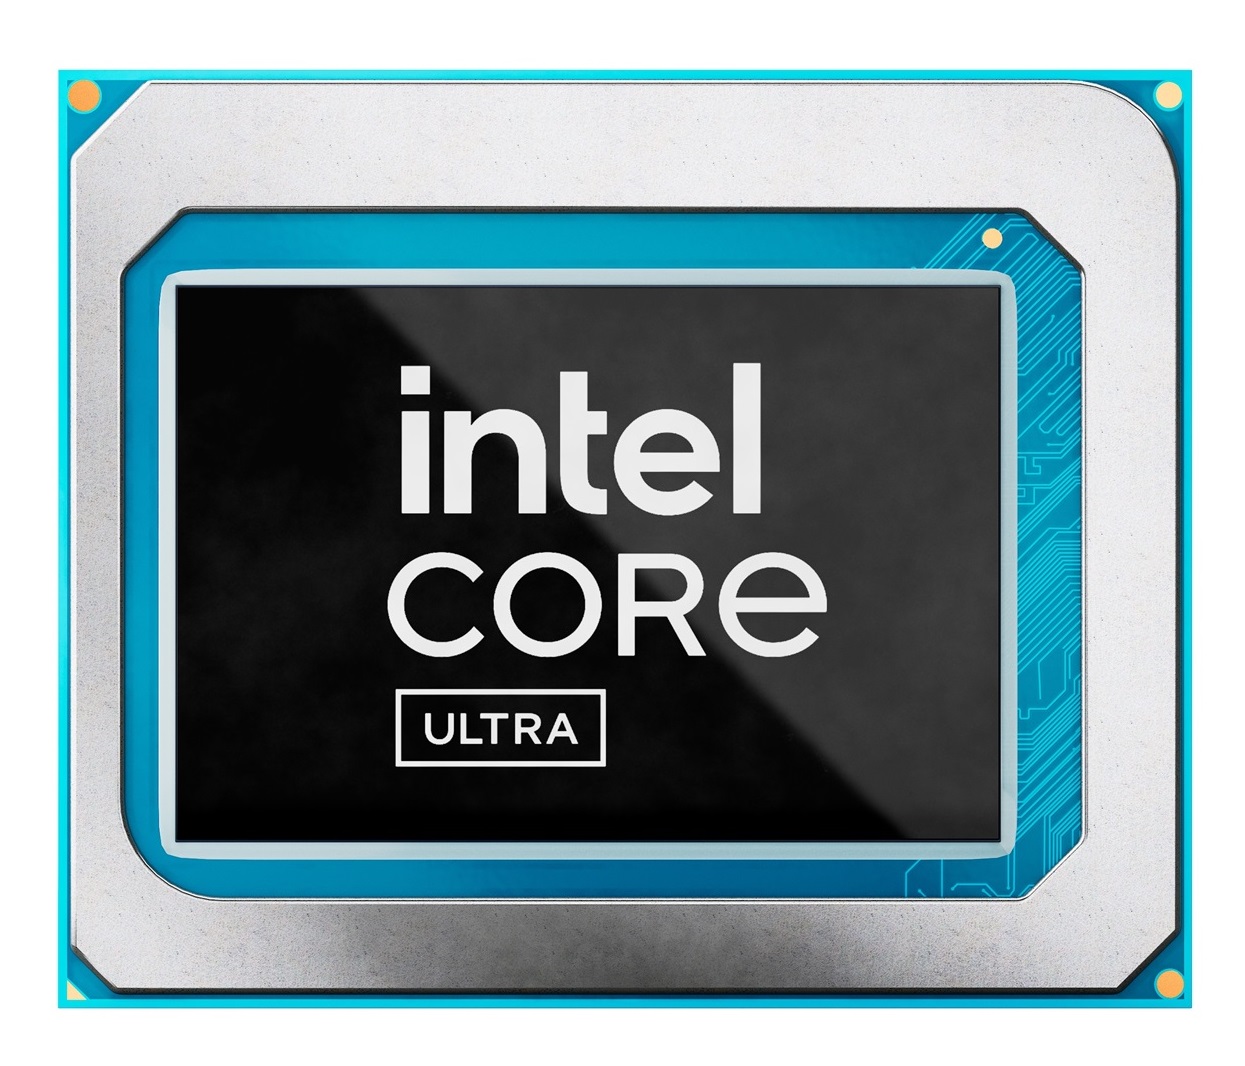 Intel says manufacturing issues are hindering sizzling Core Ultra gross sales